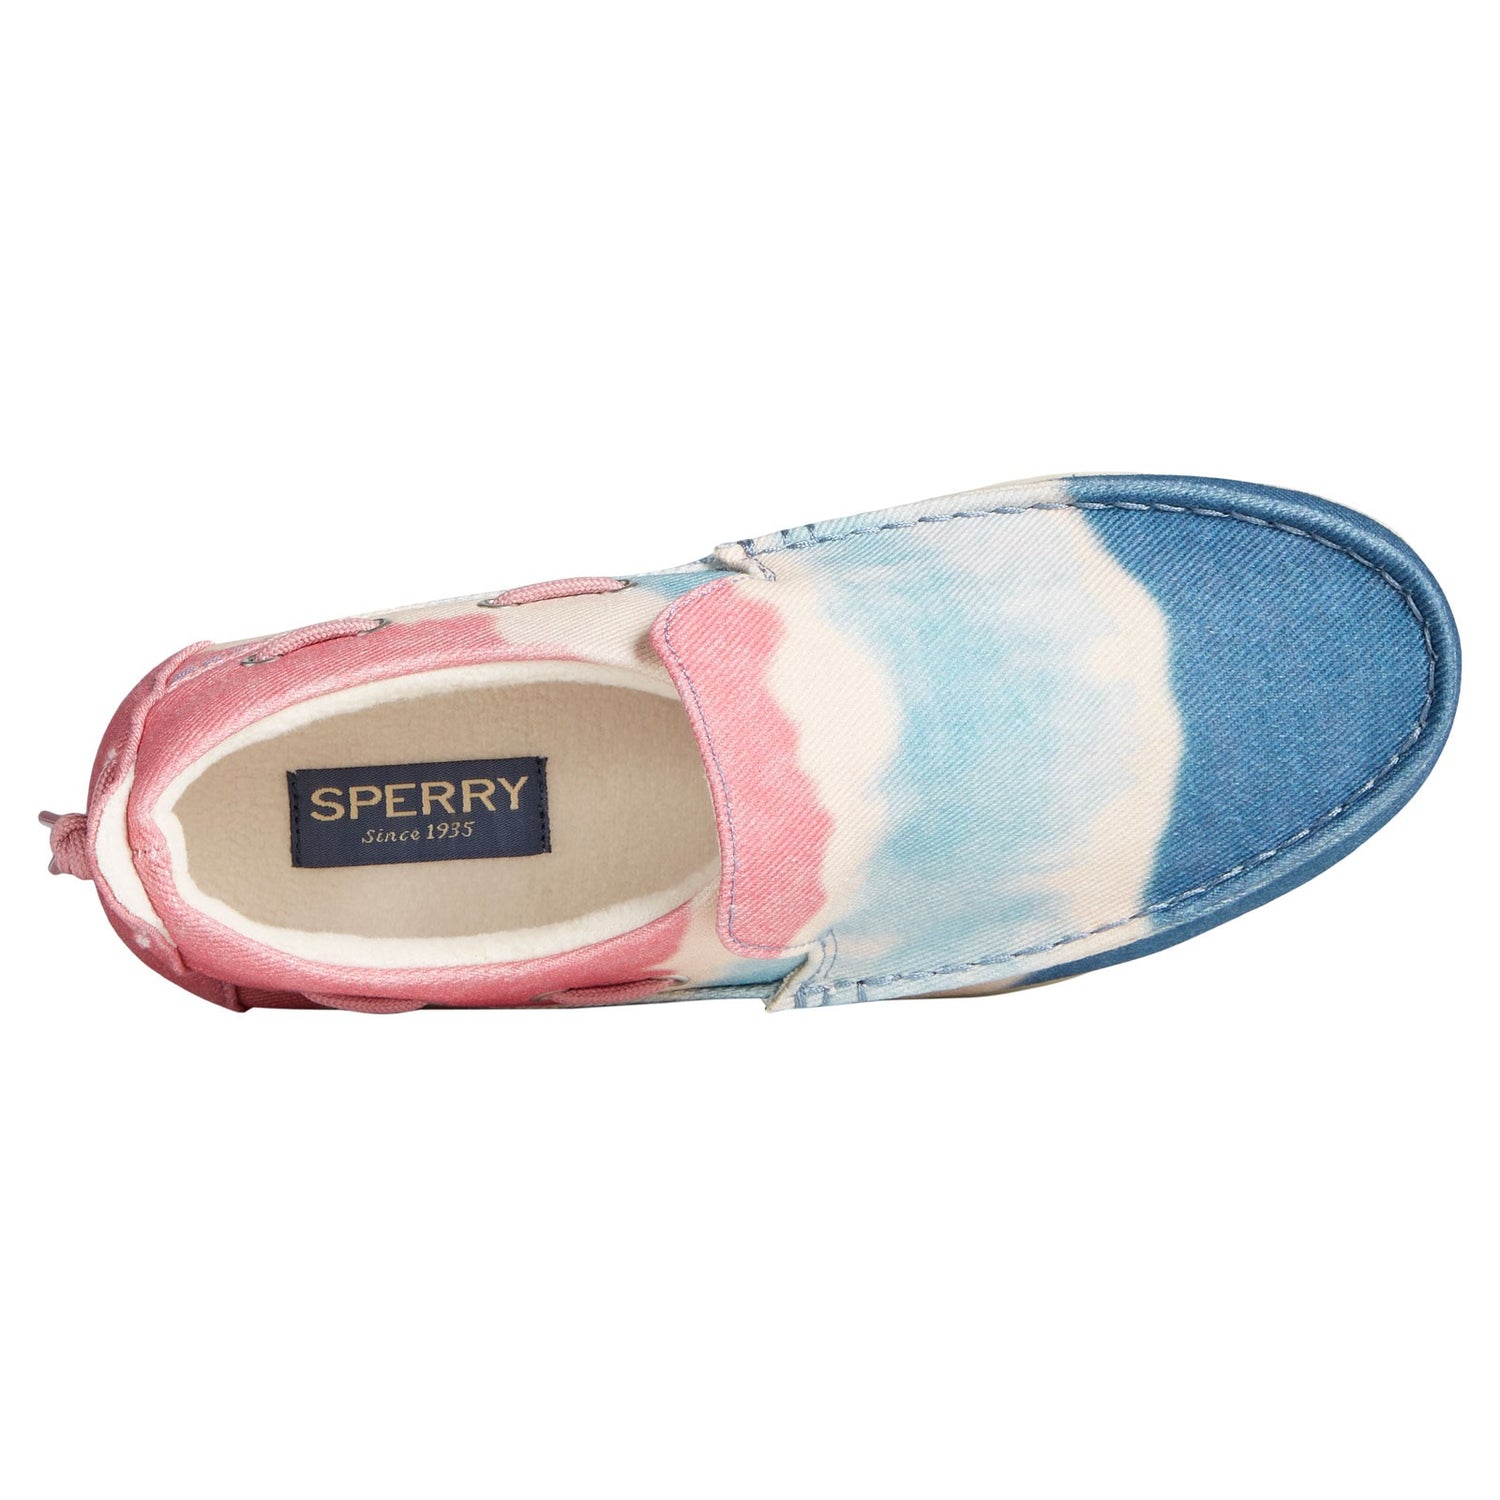 Peltz Shoes  Women's Sperry Moc-Sider Canvas Slip-On BLUE PINK STS87053